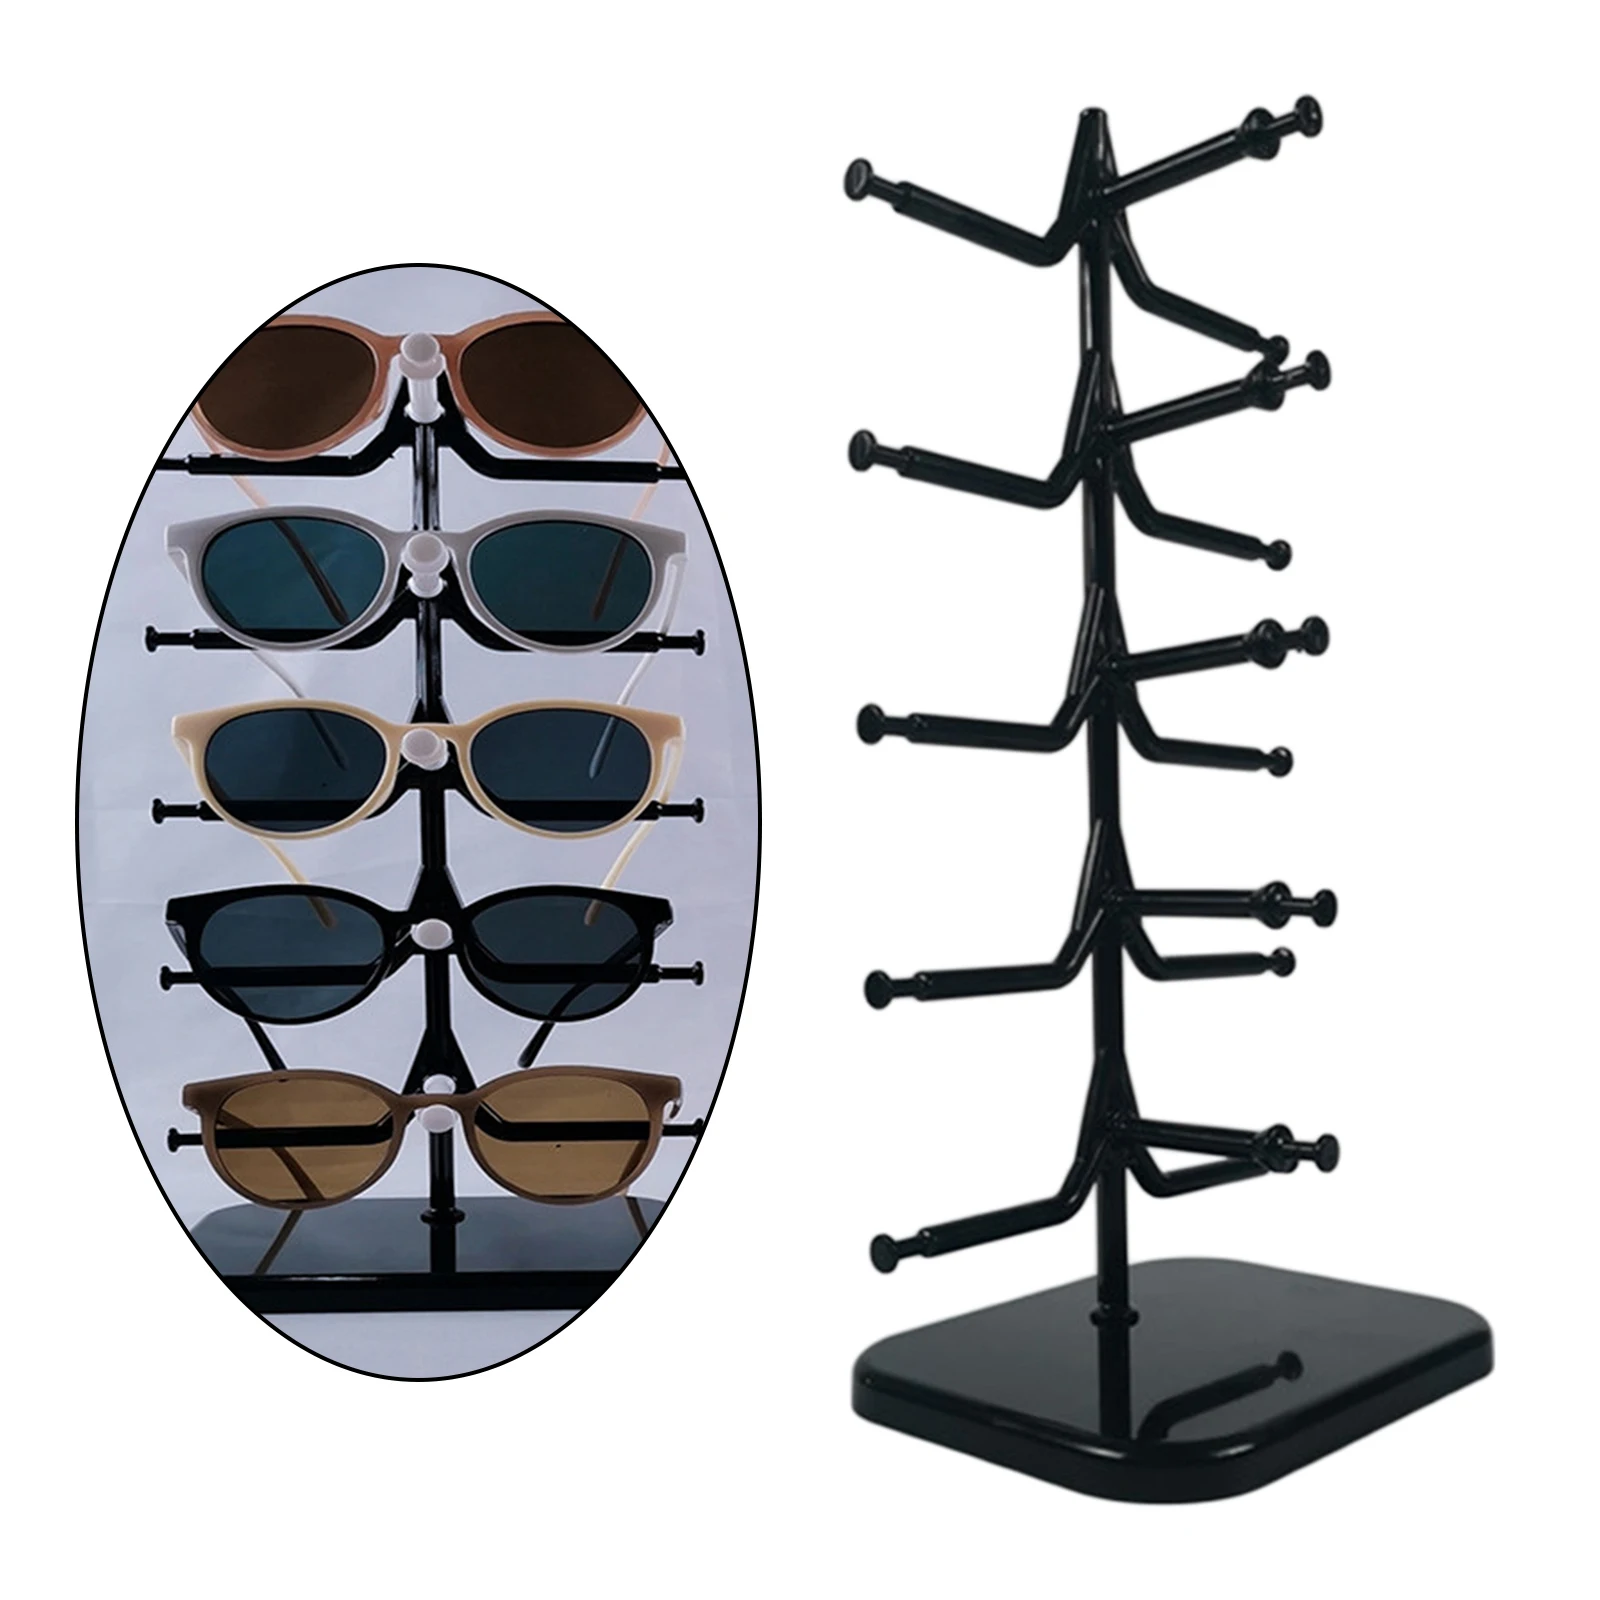 5 Layers Sunglass Display Rack Shelf Eyeglasses Show Stand Holder for 5 Pairs Glasses